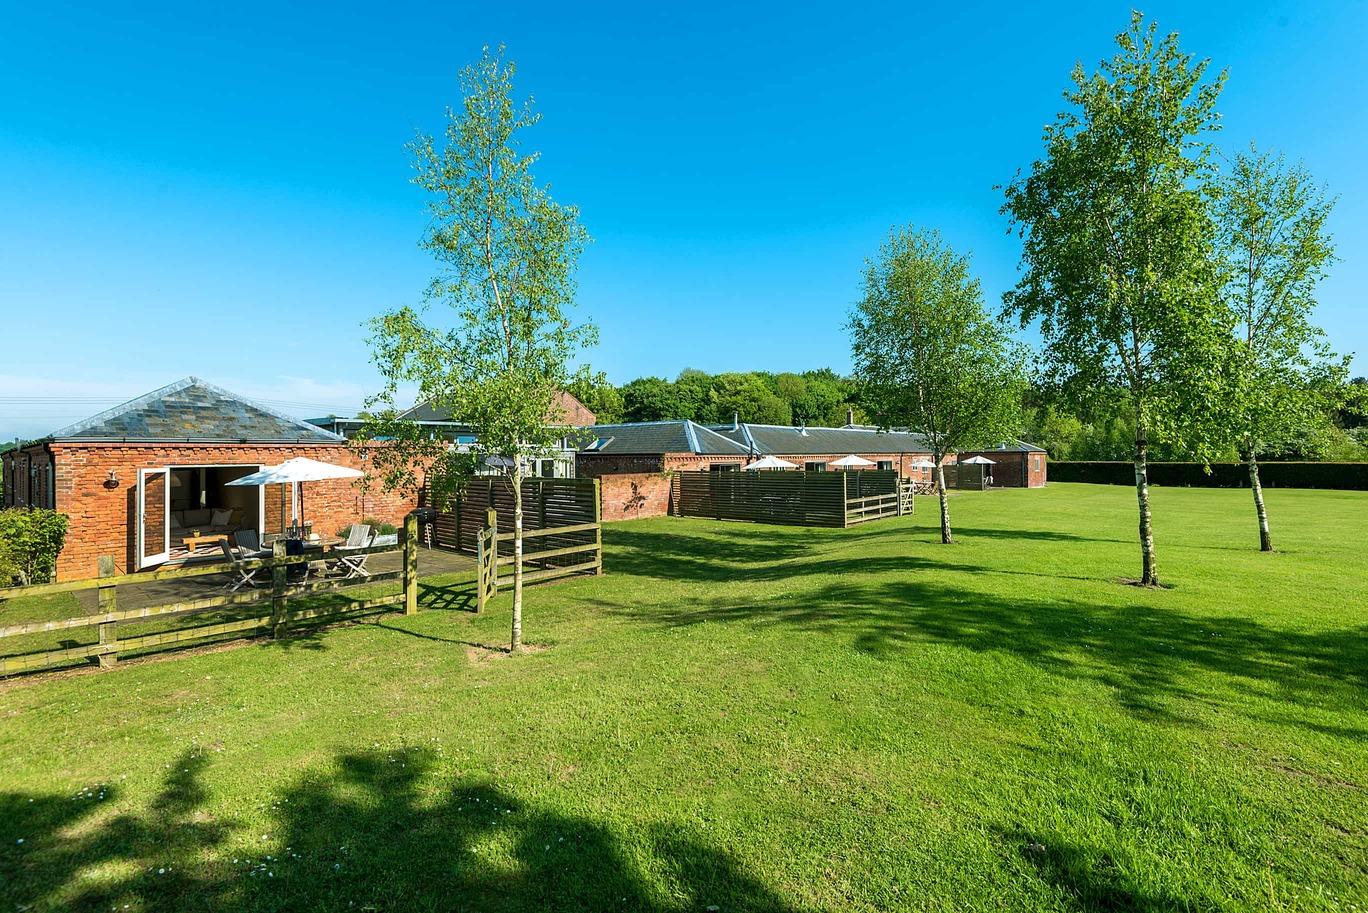 Holiday cottages in the countryside